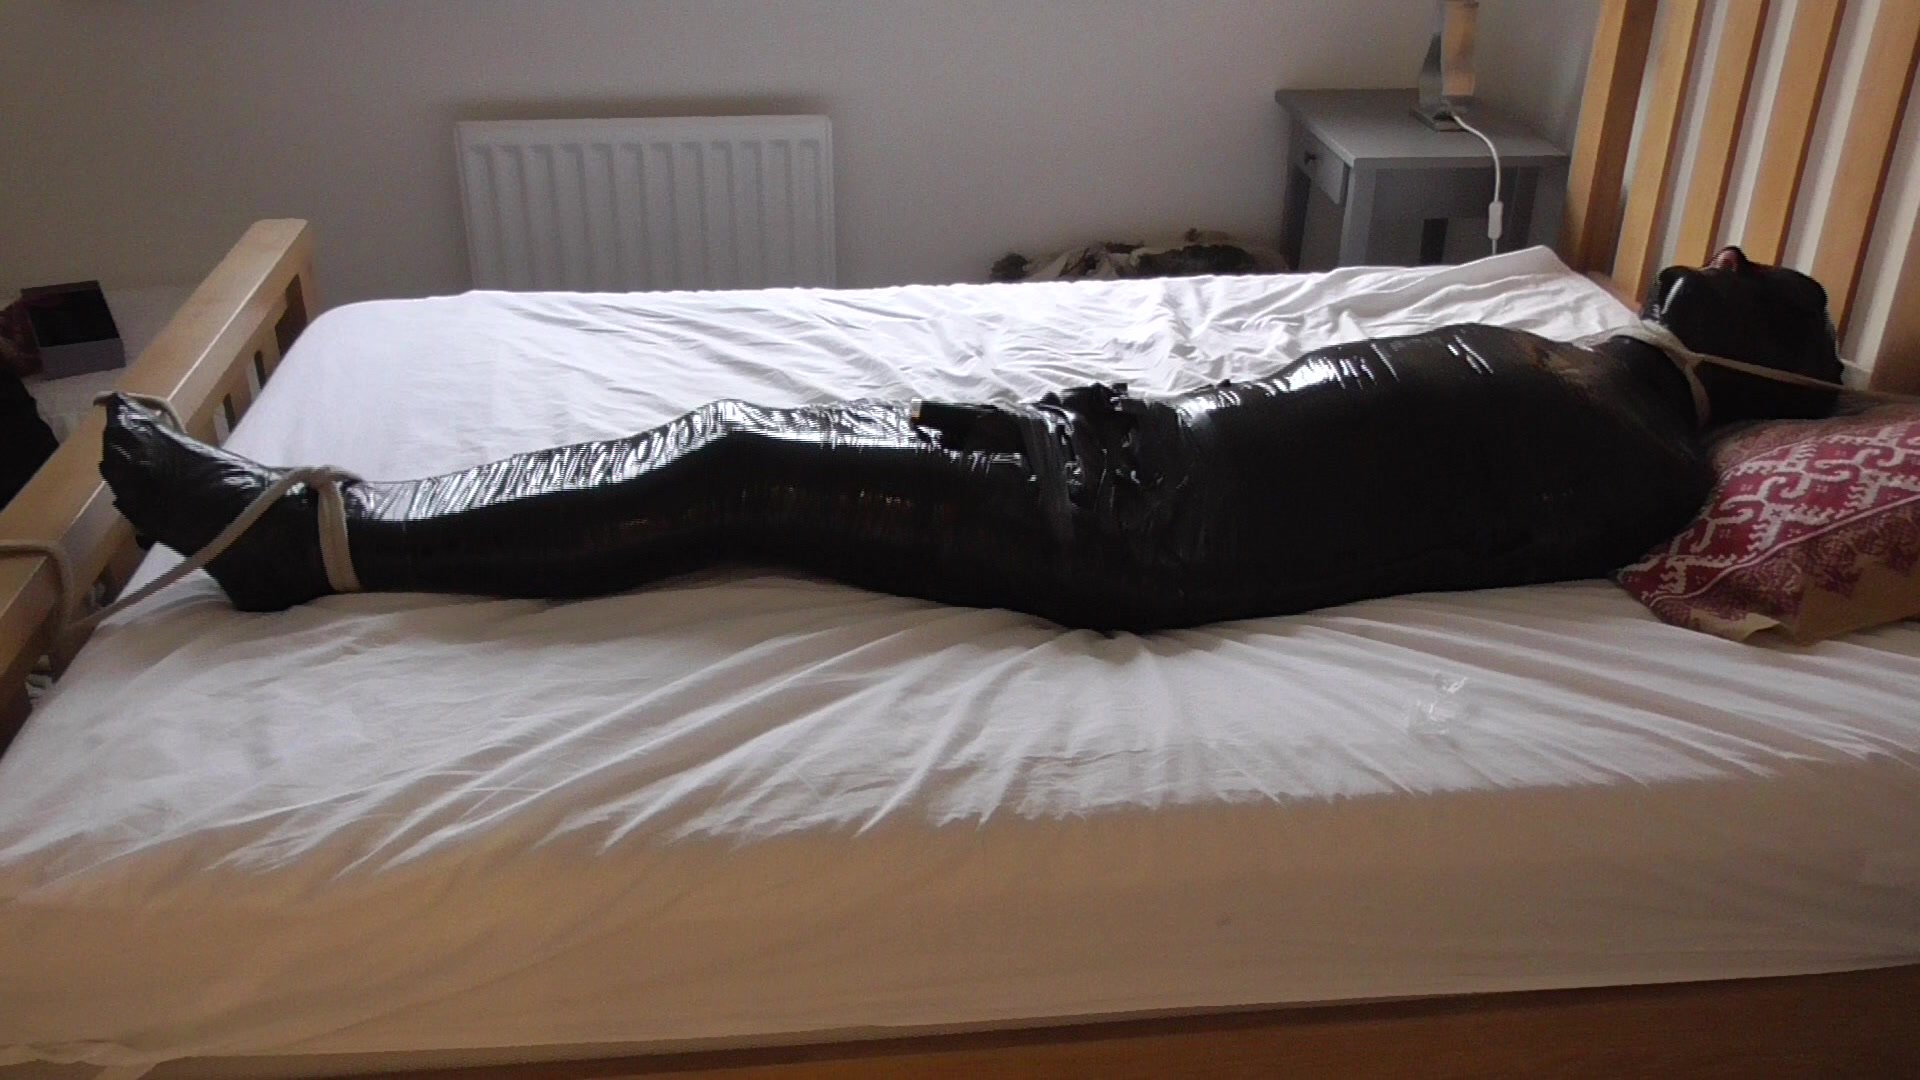 mummified and teased part 2 second part .